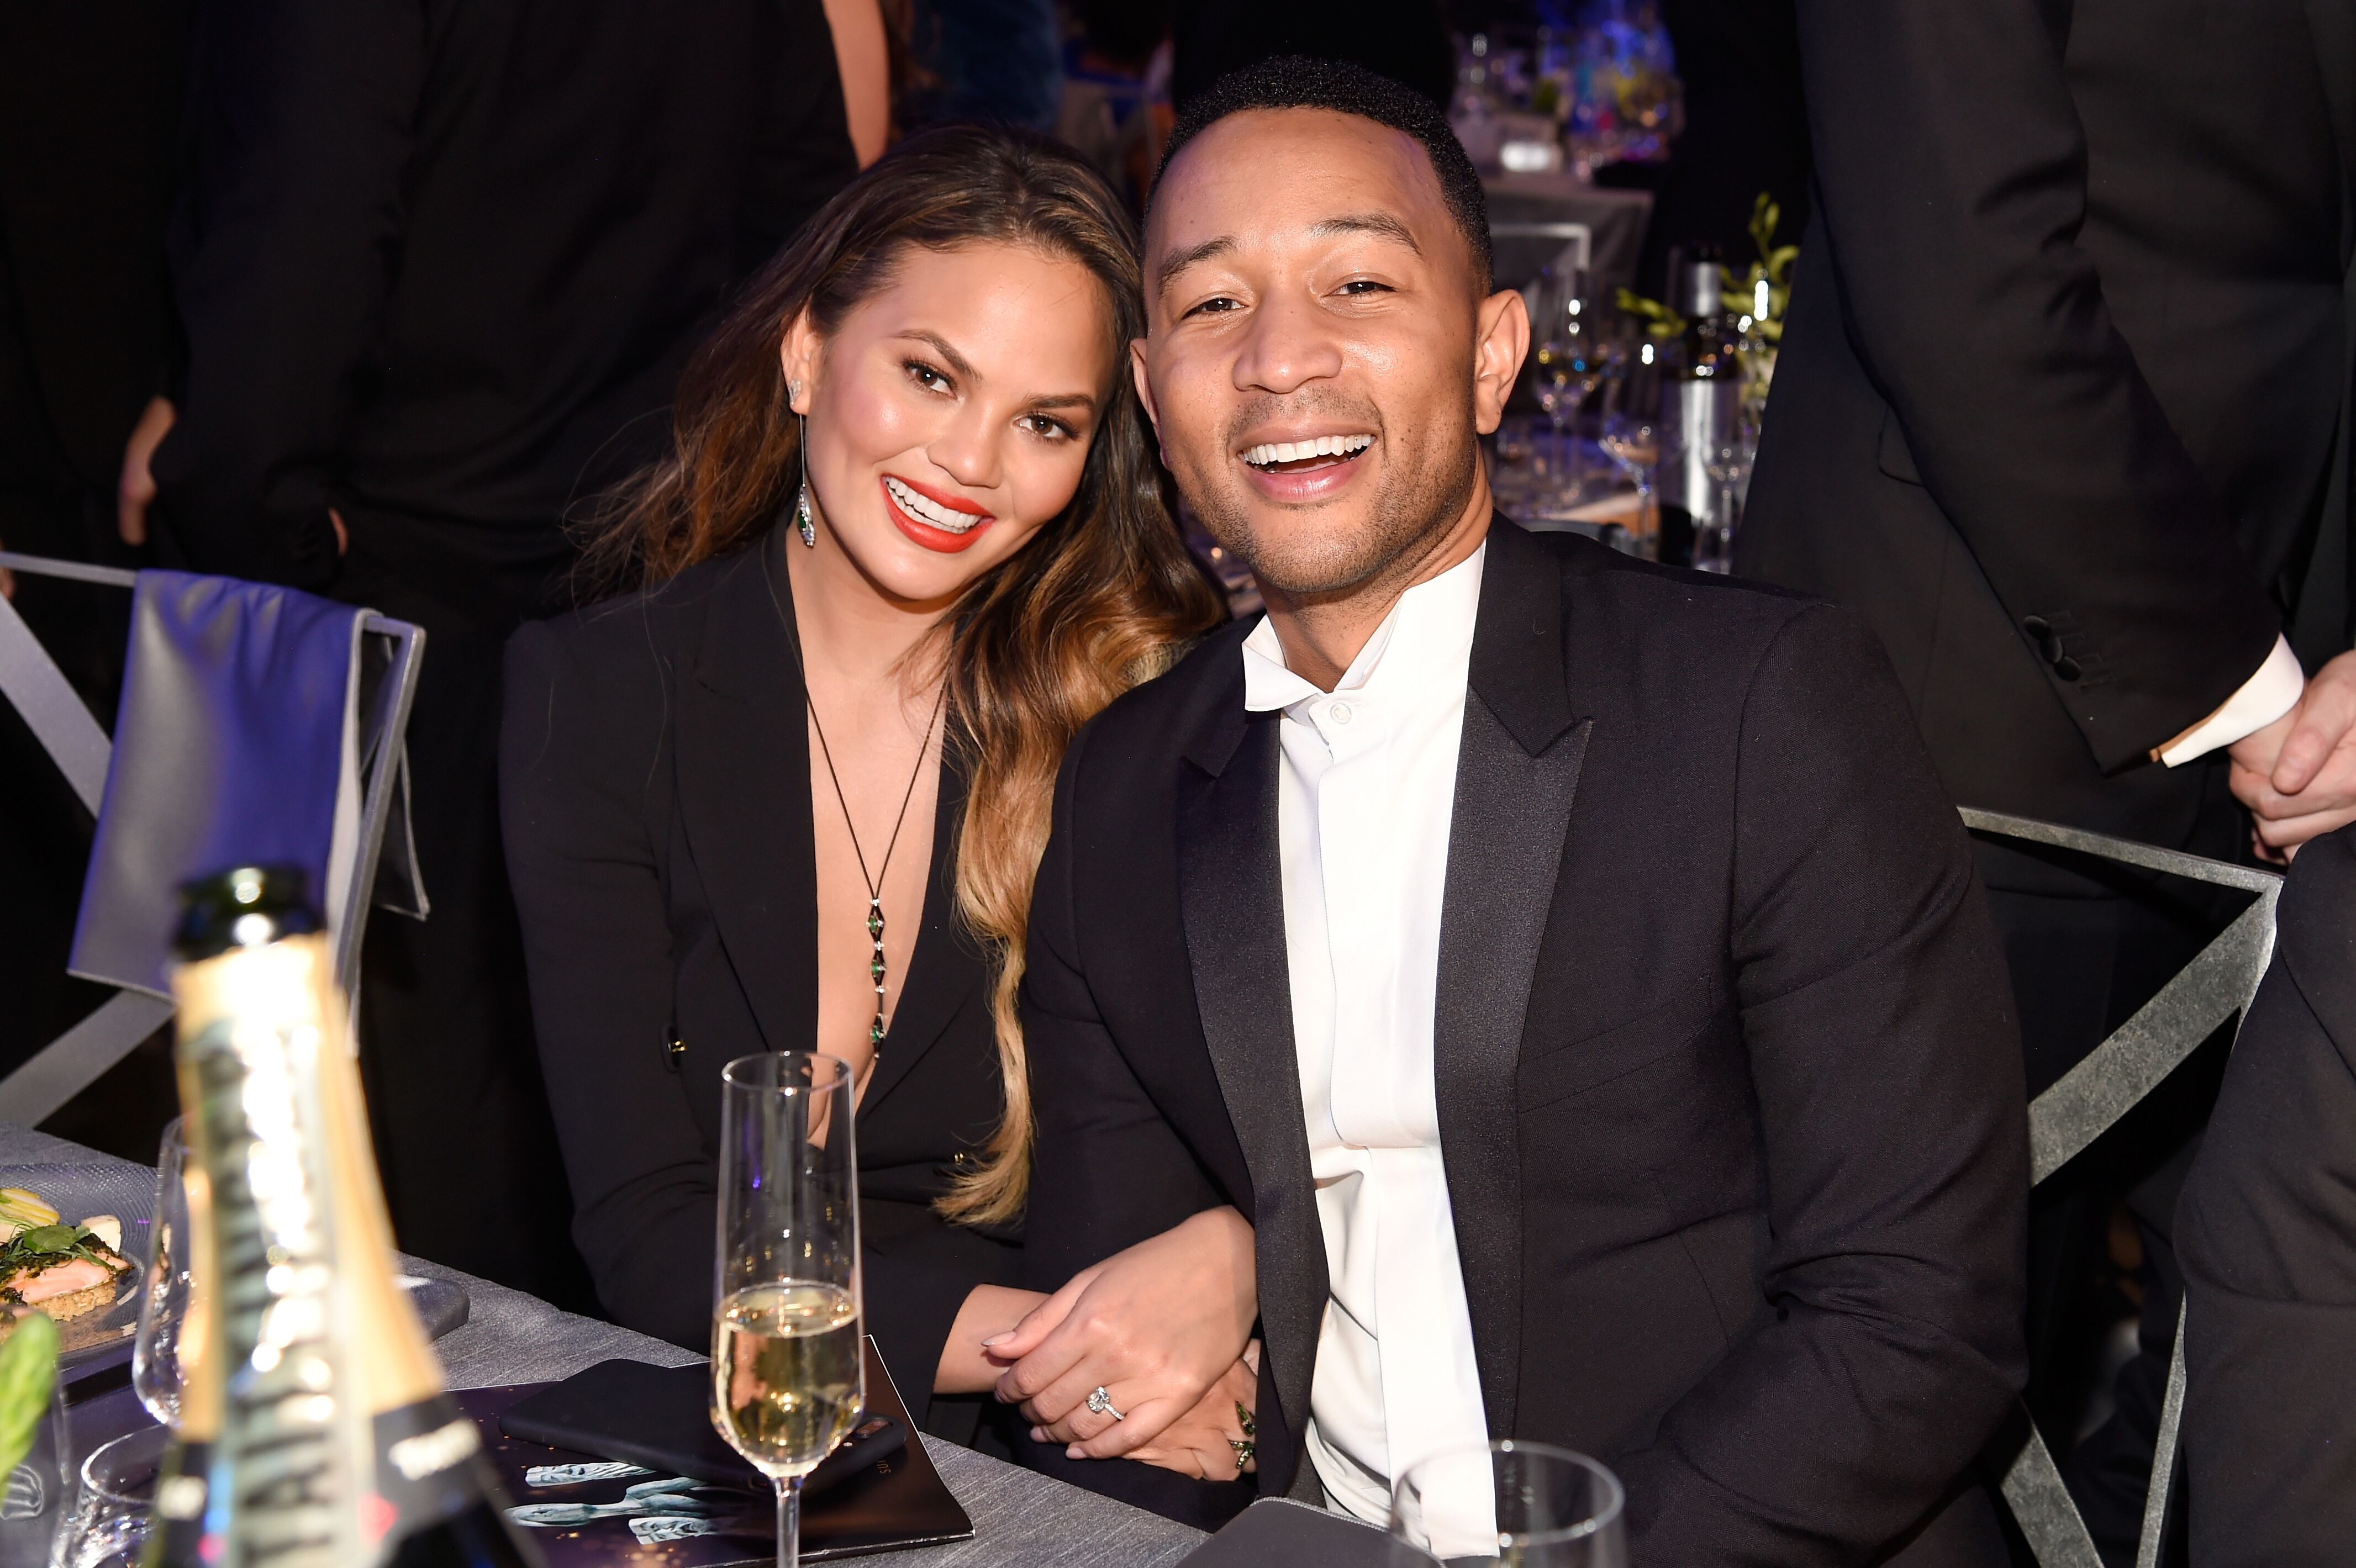 Chrissy Teigen and artist John Legend during The 23rd Annual Screen Actors Guild Awards. | Source: Getty Images